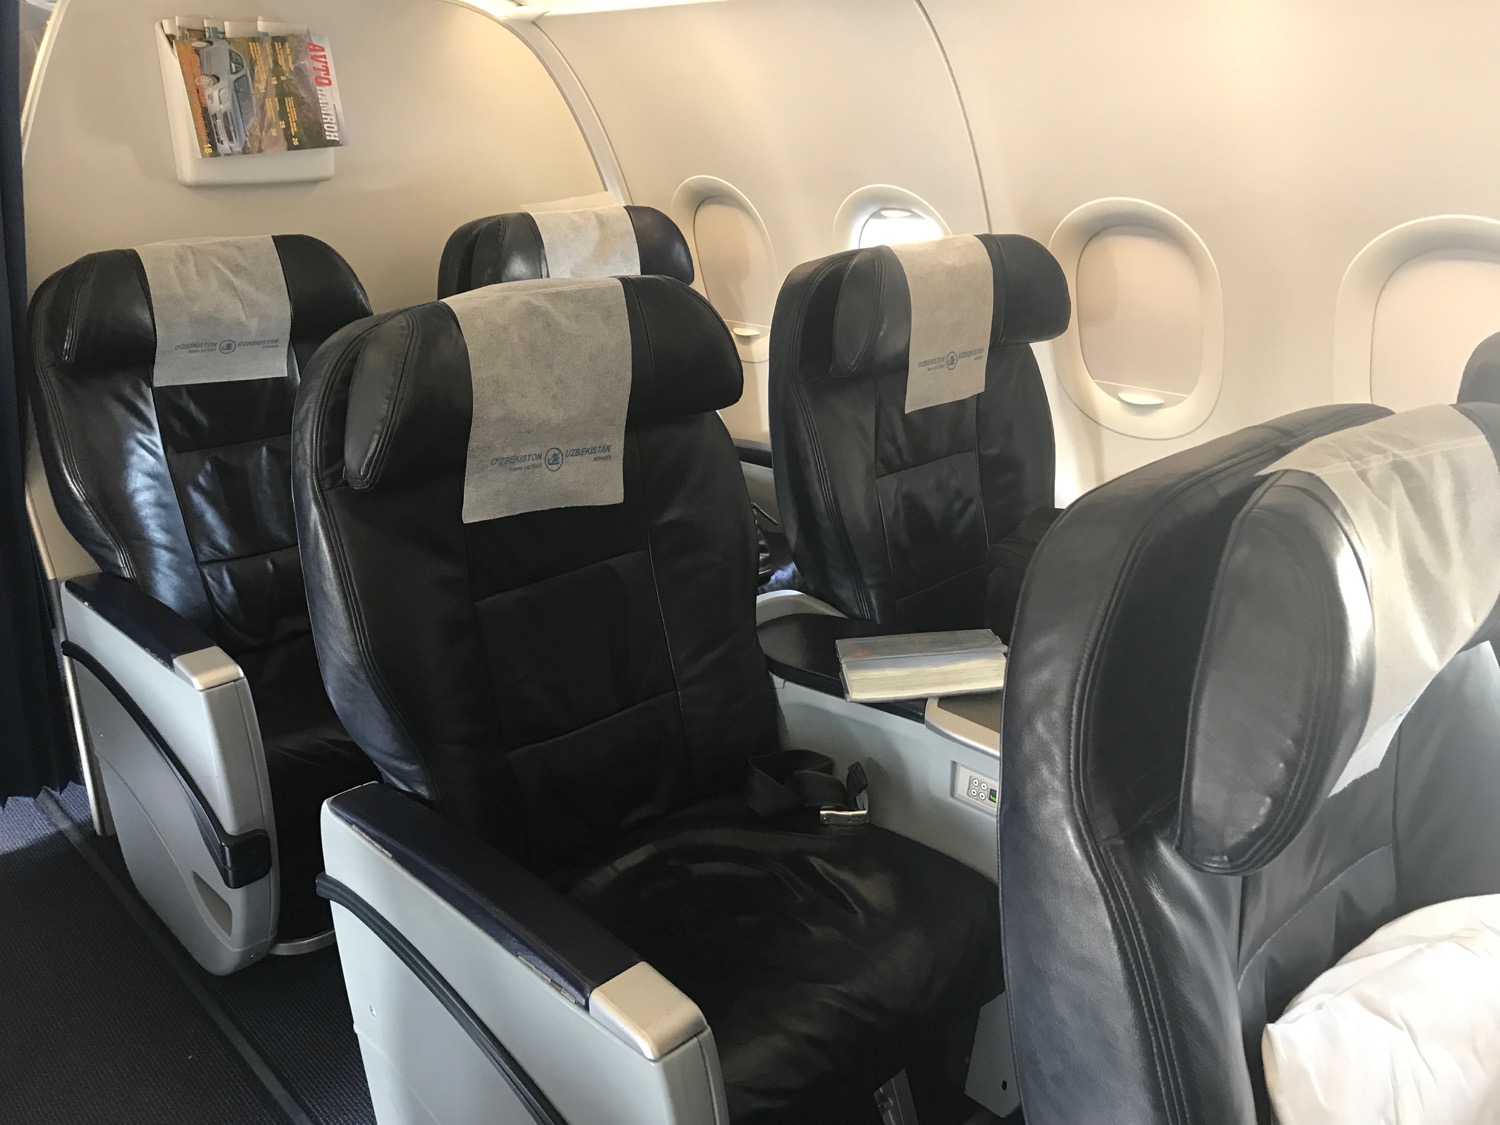 a row of black seats on an airplane